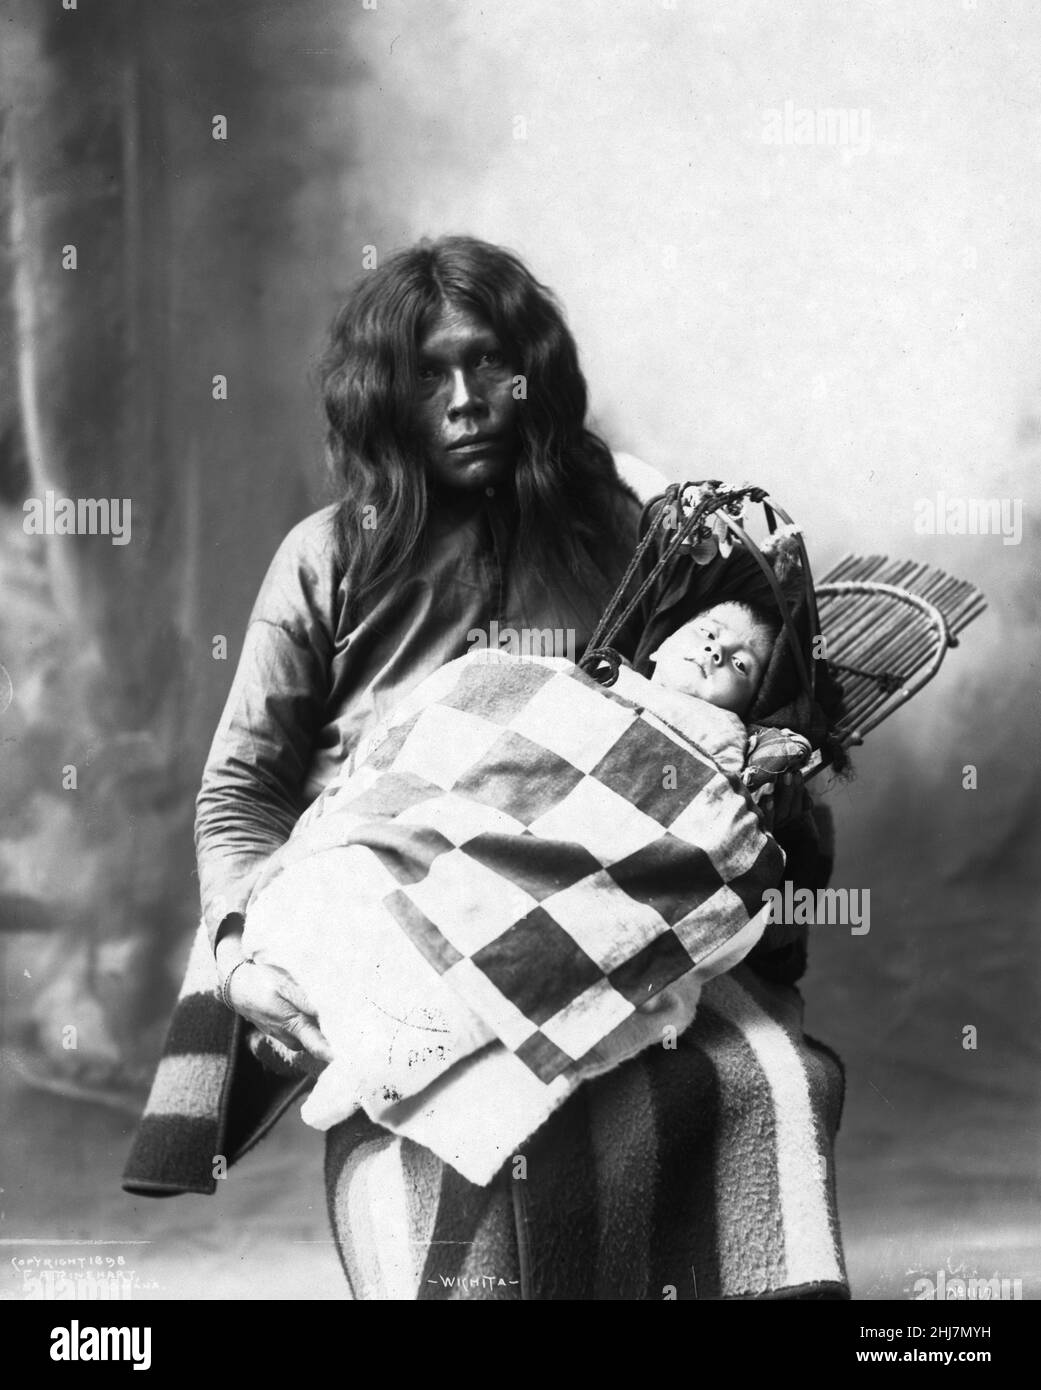 Antique and vintage photo - Native american / Indian / American Indian - Wichita - photo by F.A. Rinehart, Omaha. 1899. Stock Photo